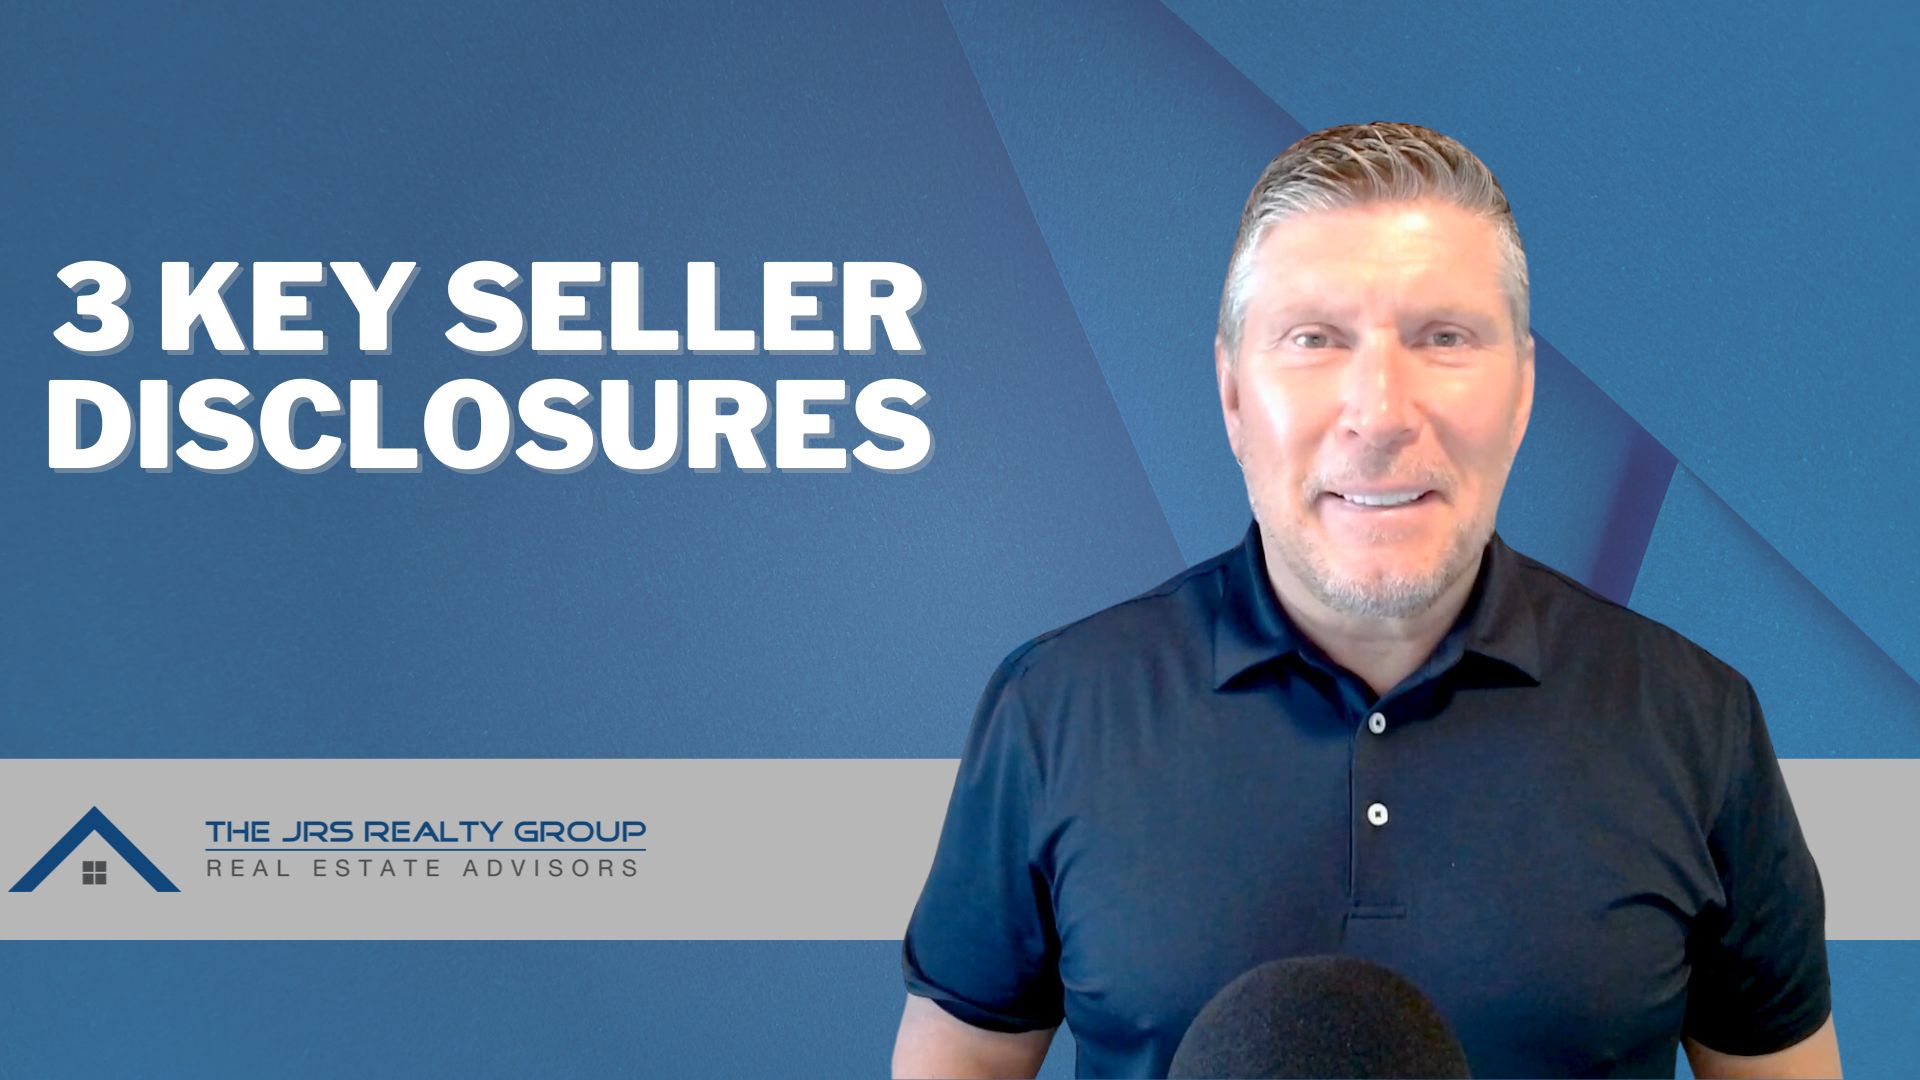 What Must Sellers Reveal in Disclosures?